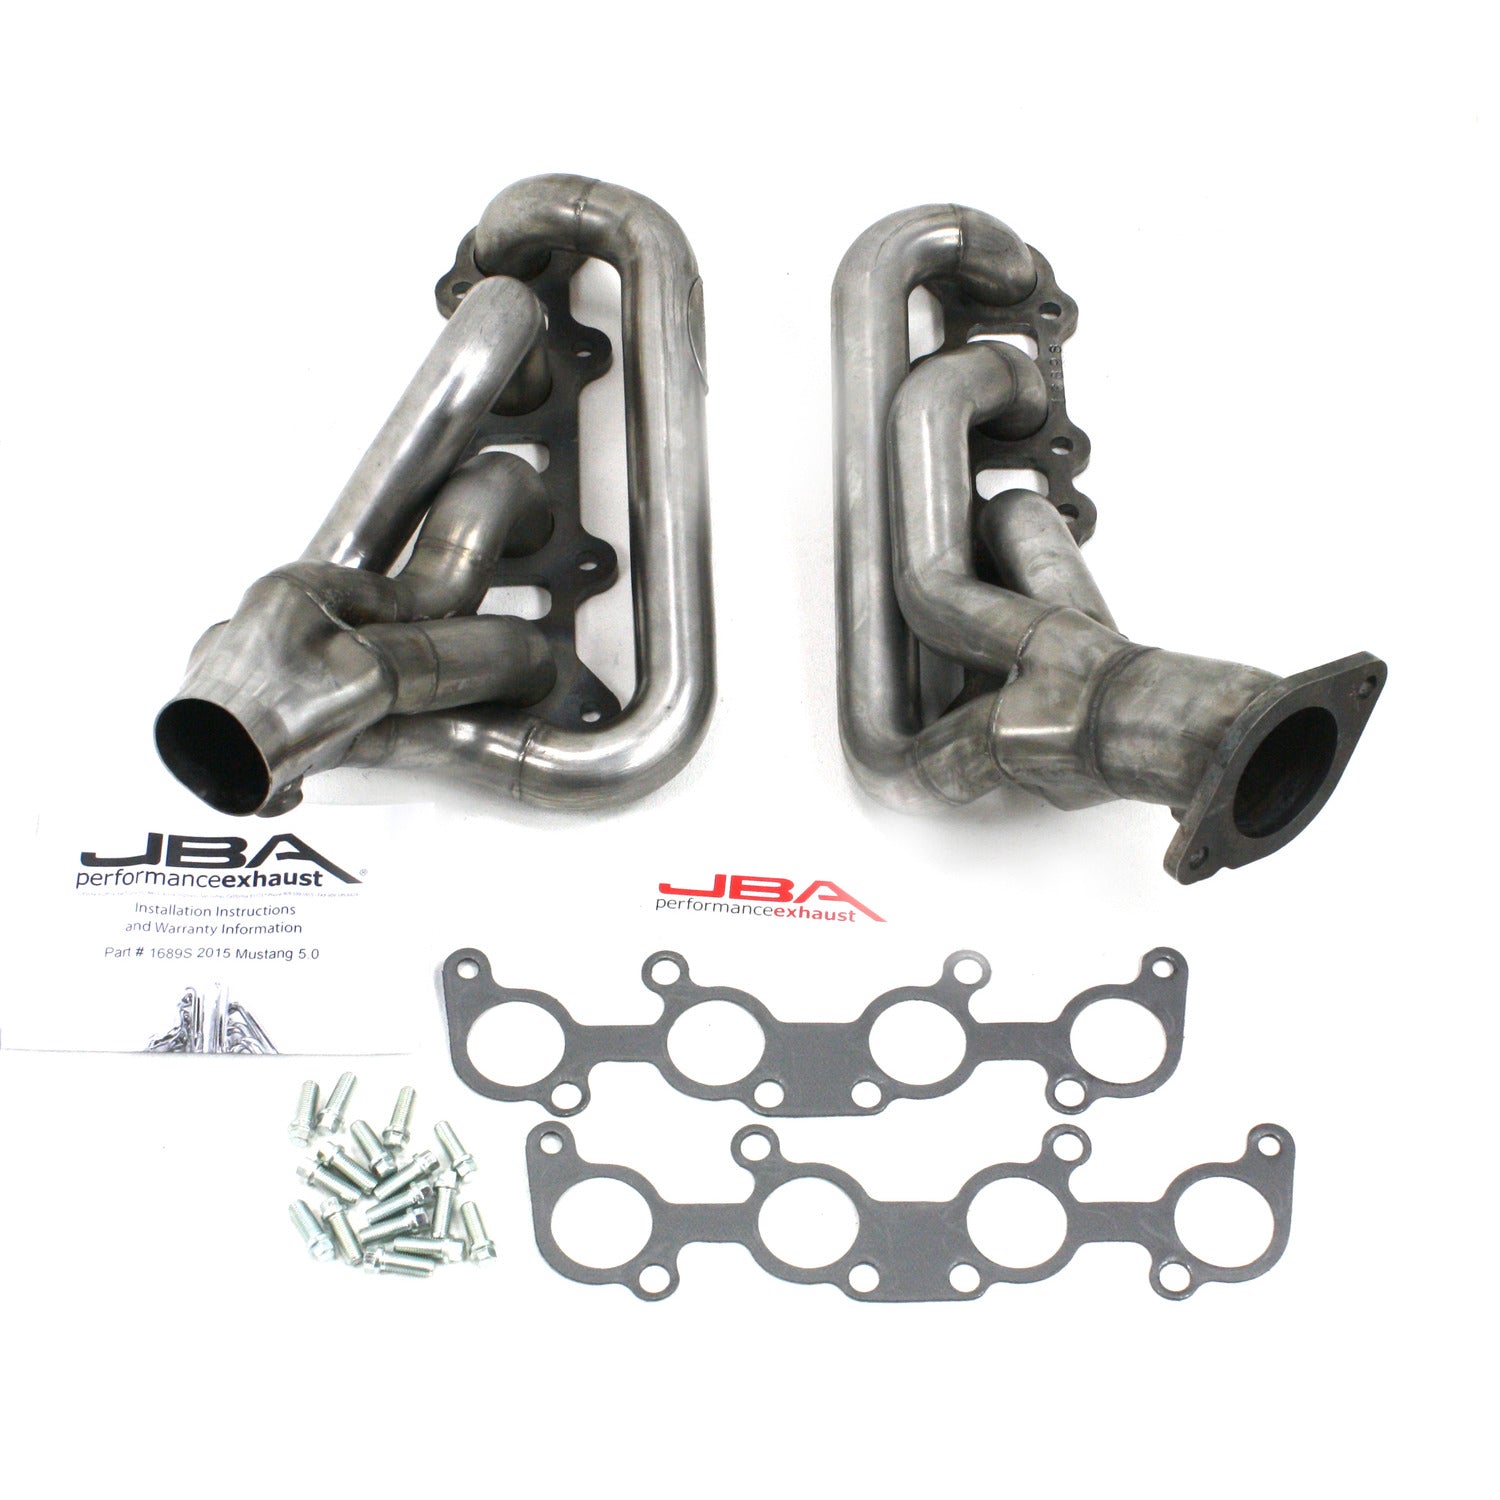 JBA Performance Exhaust 1689S Header Shorty Stainless Steel 15-19 Mustang 5.0L